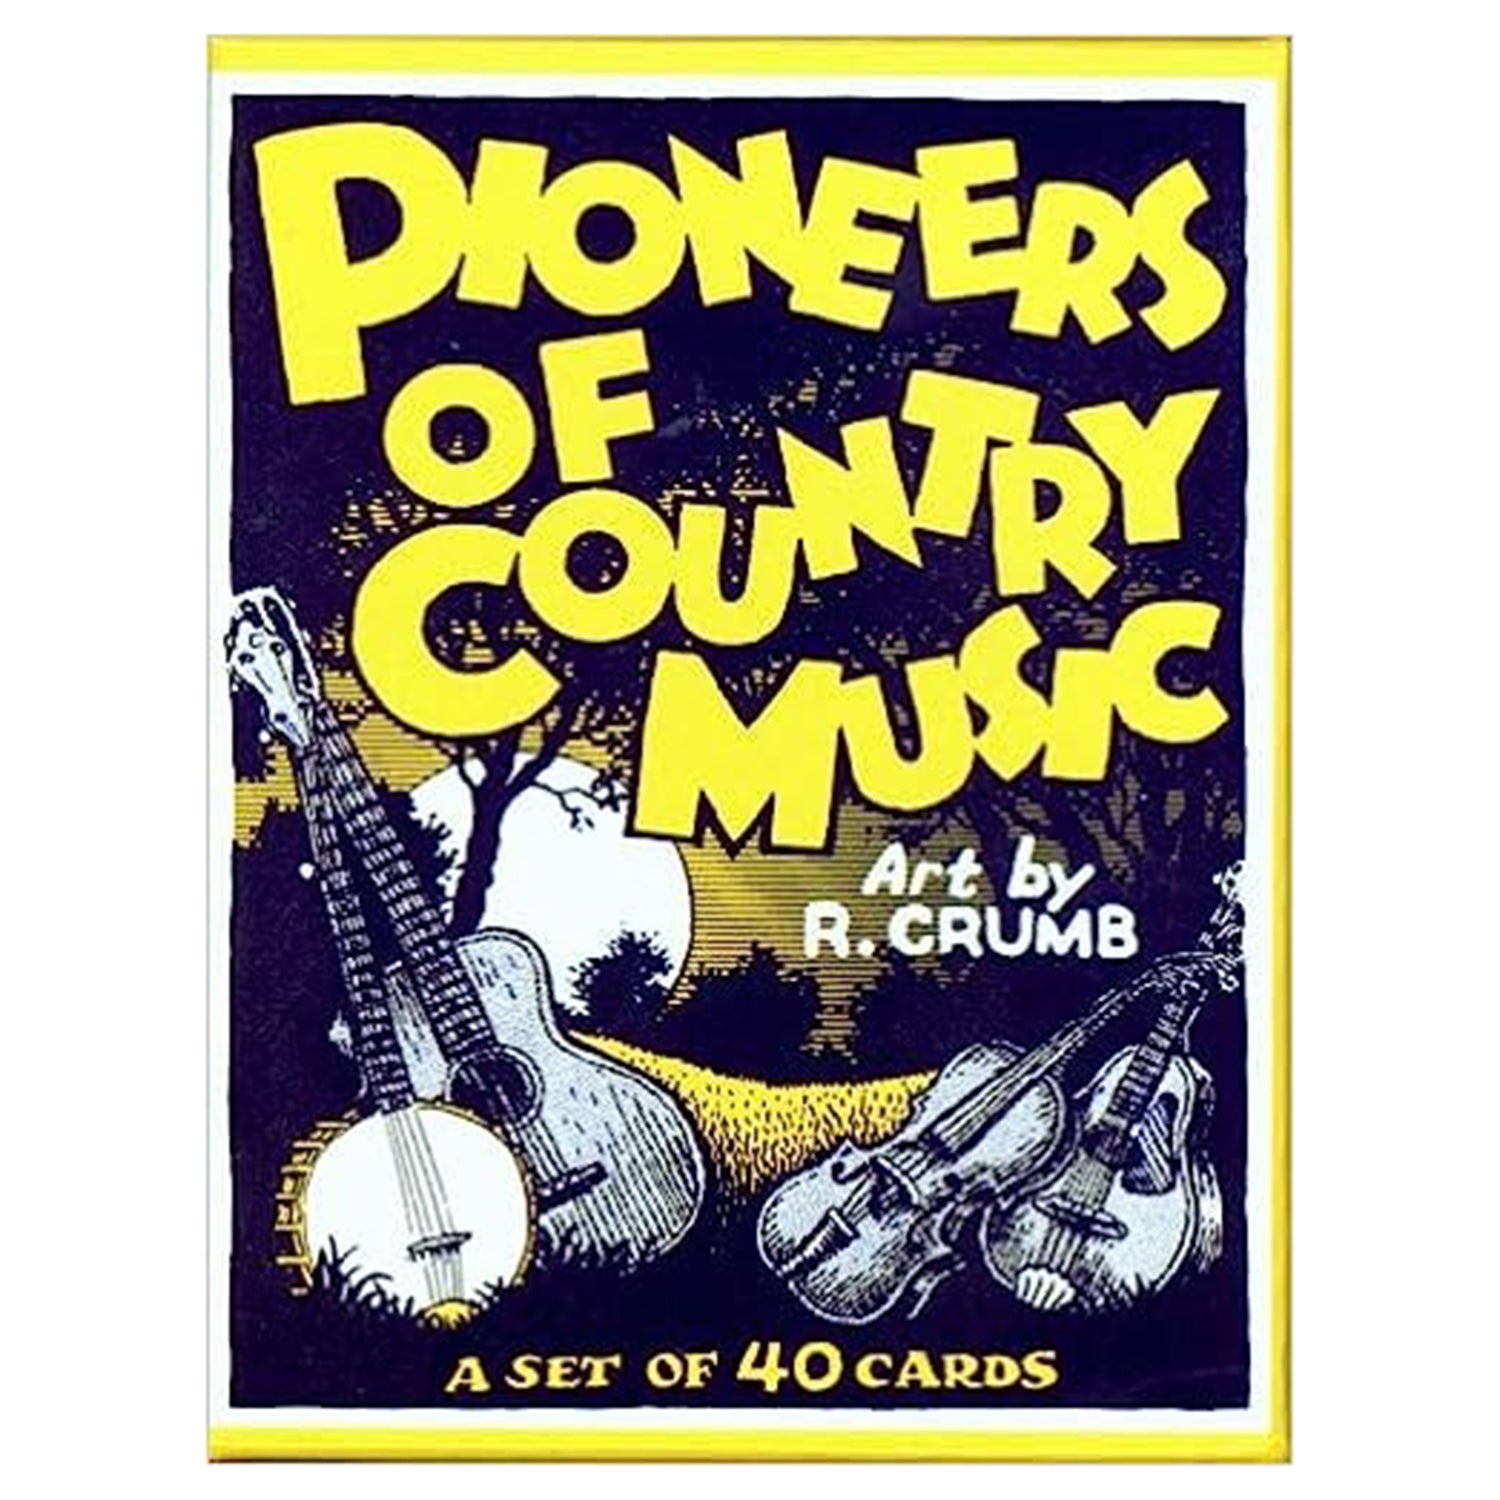 CIRCLES BOOKS Pioneer of Country Music Trading Card Set by R. Crumb